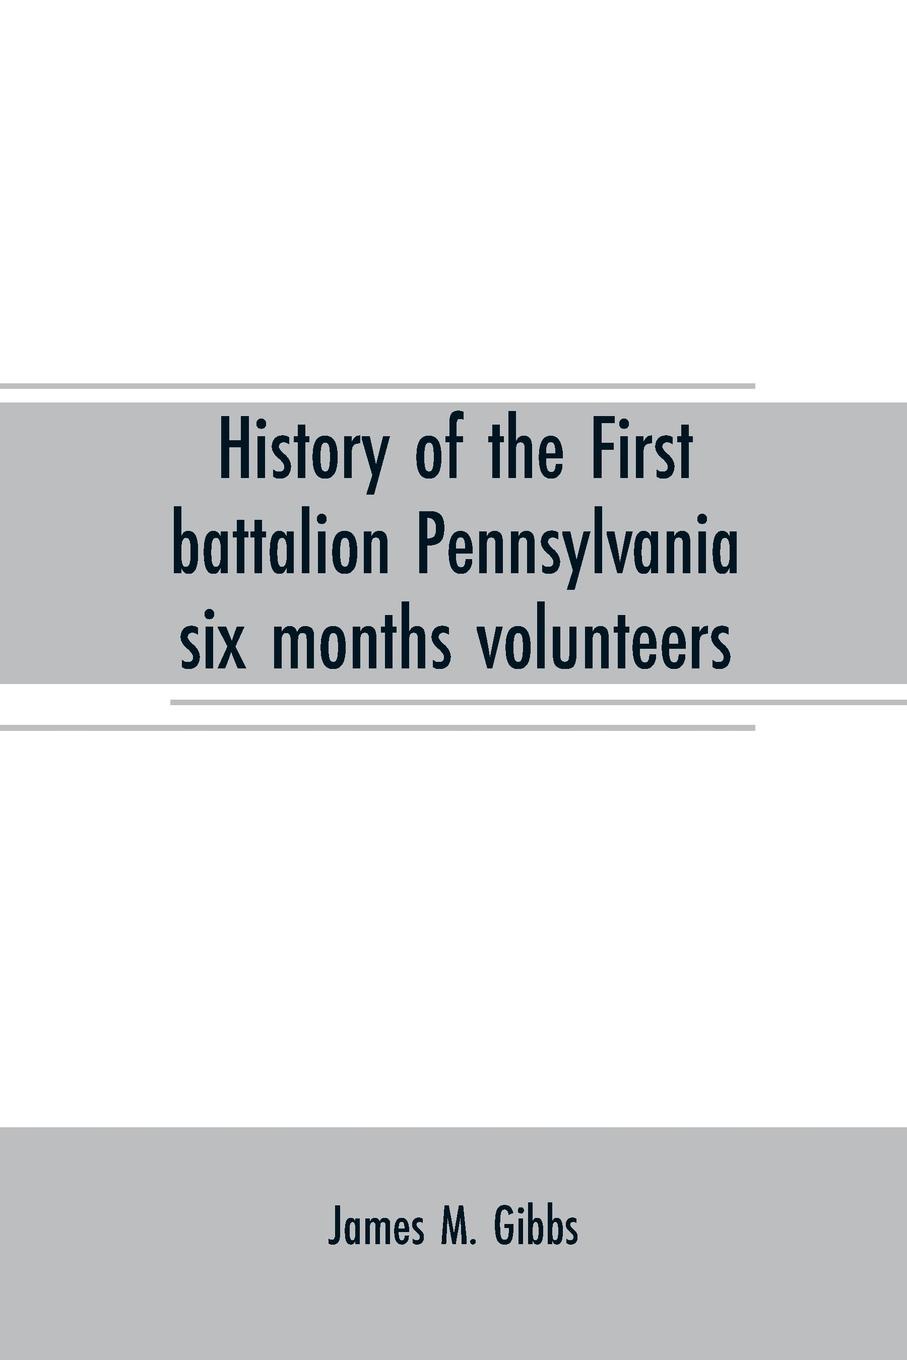 History of the First battalion Pennsylvania six months volunteers and 187th regiment Pennsylvania volunteer infantry; six months and three years service, civil war, 1863-1865